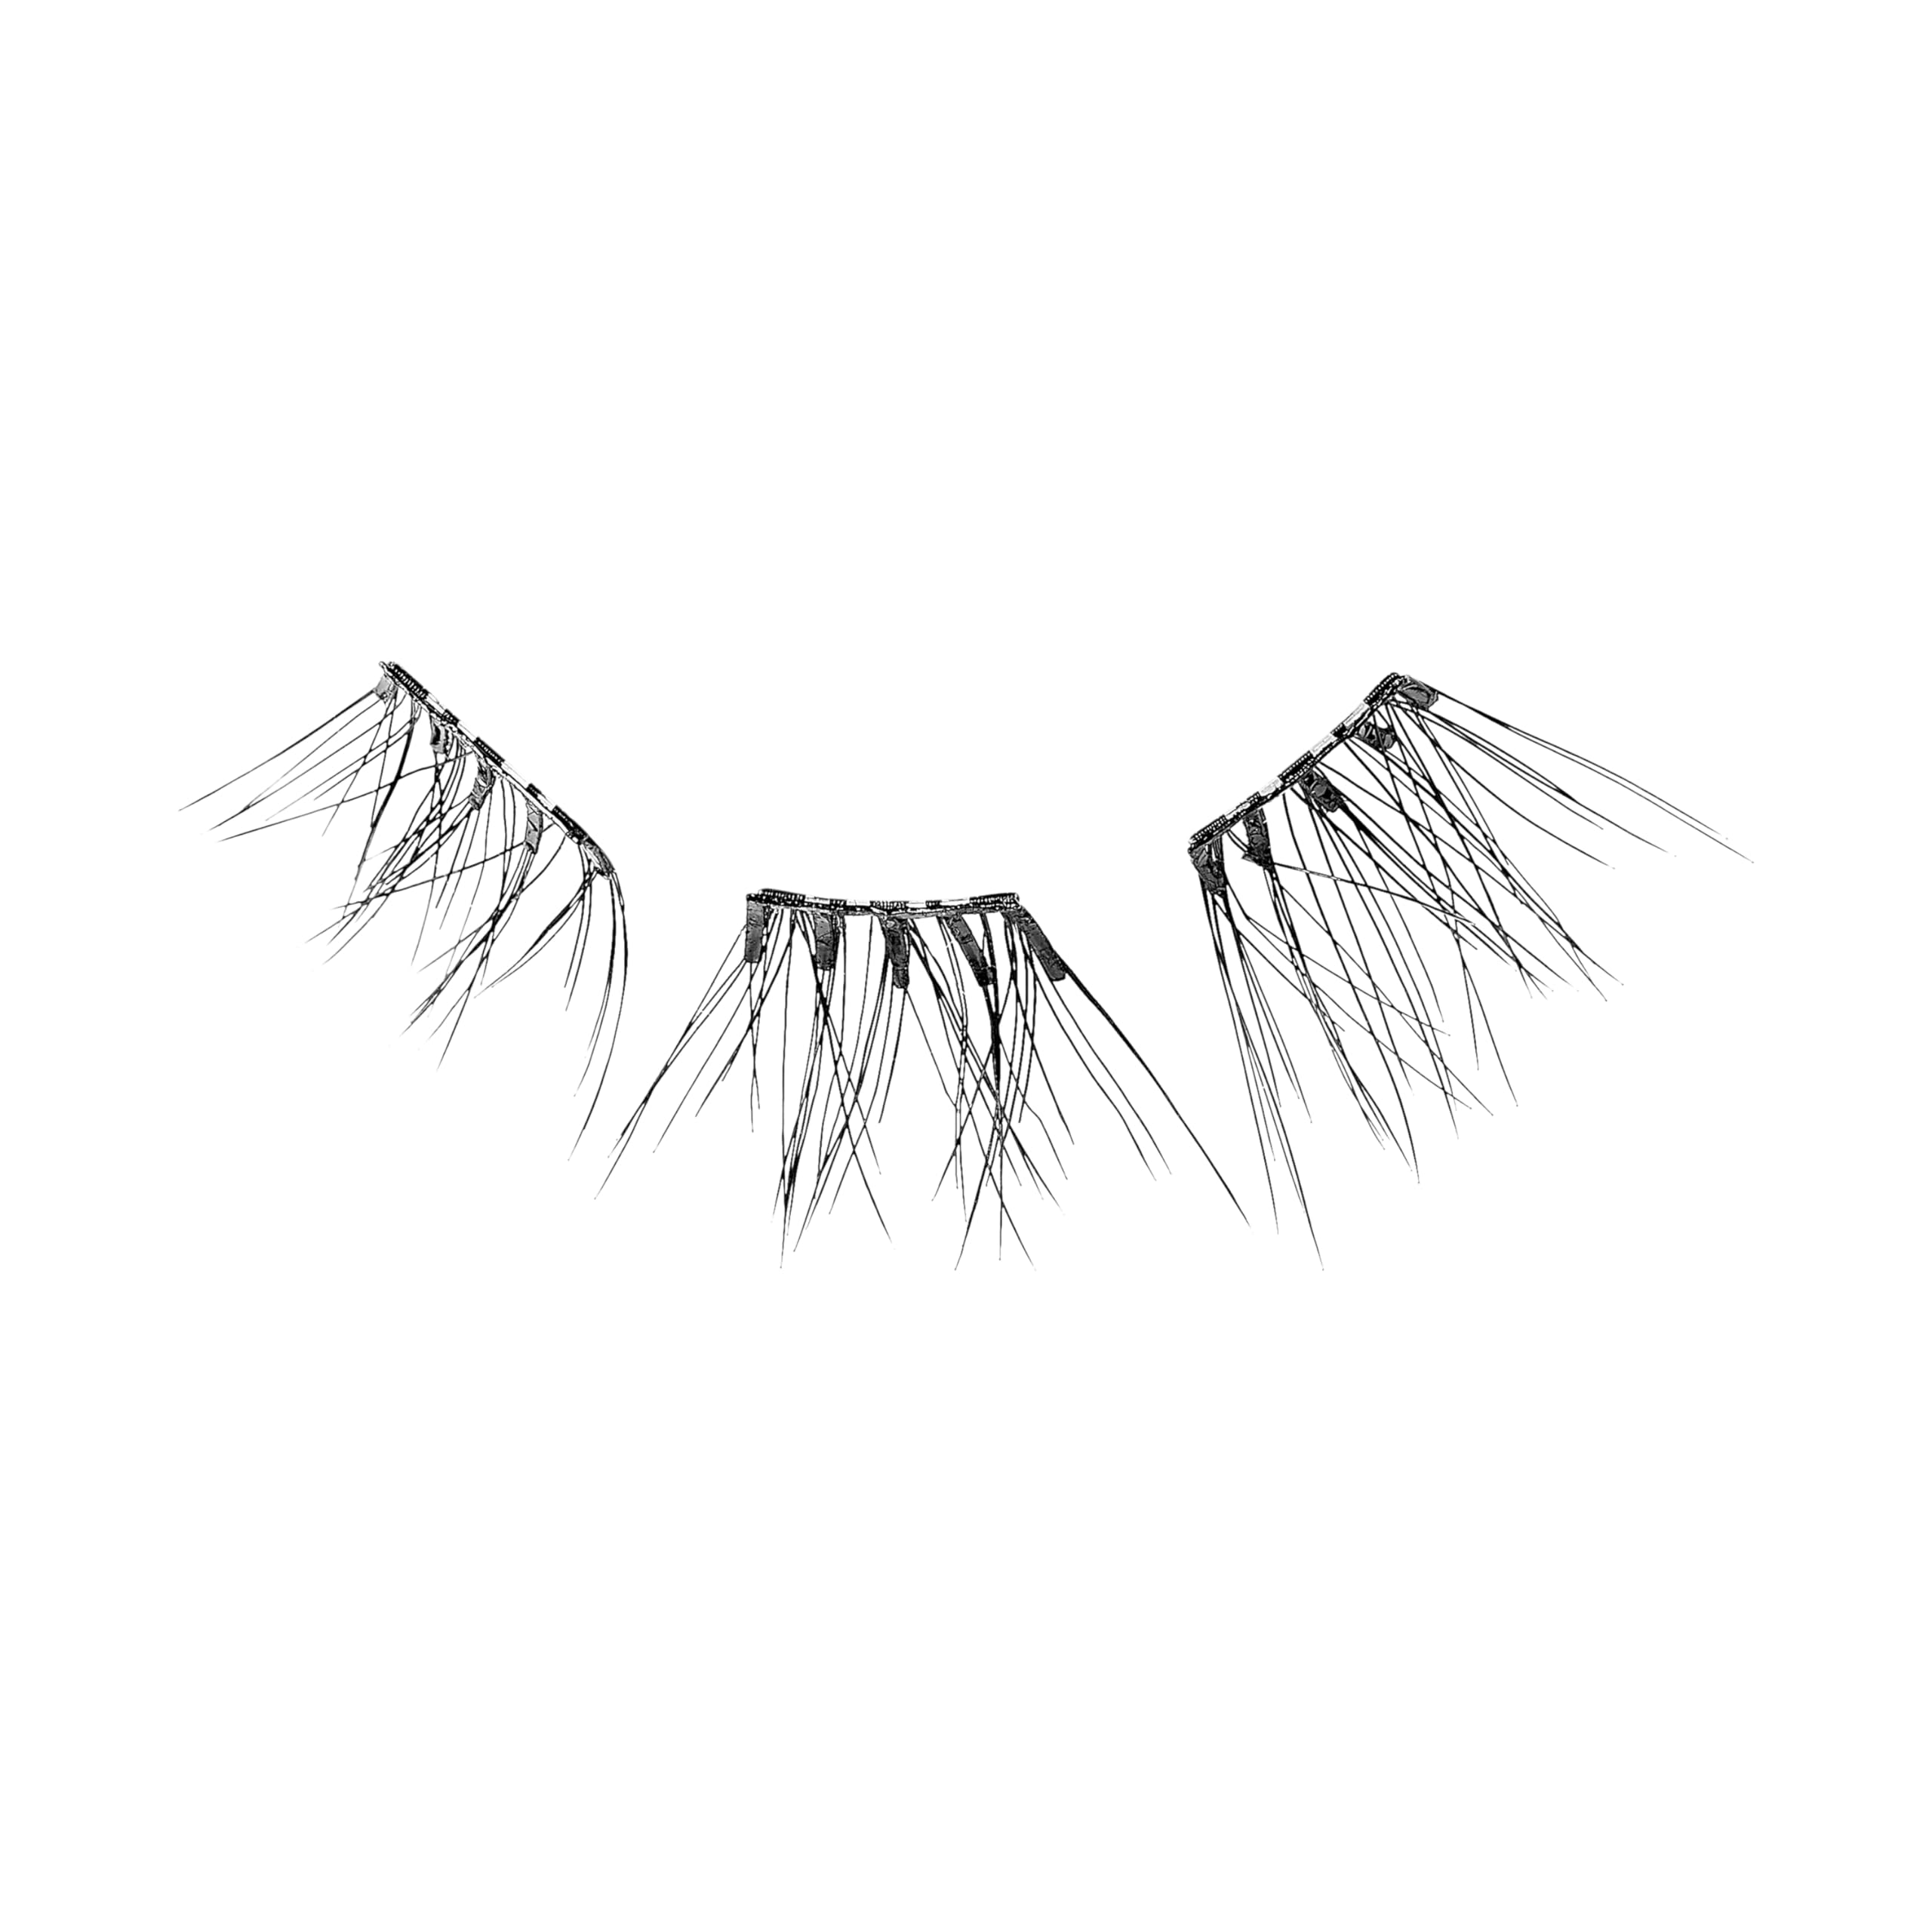 KISS imPRESS False Eyelashes, Lash Clusters, Falsies, Classy Natural', 10mm-12mm, Includes 12 Pieces of pre-Bonded Lashes, Contact Lens Friendly, Easy to Apply, Reusable Strip Lashes